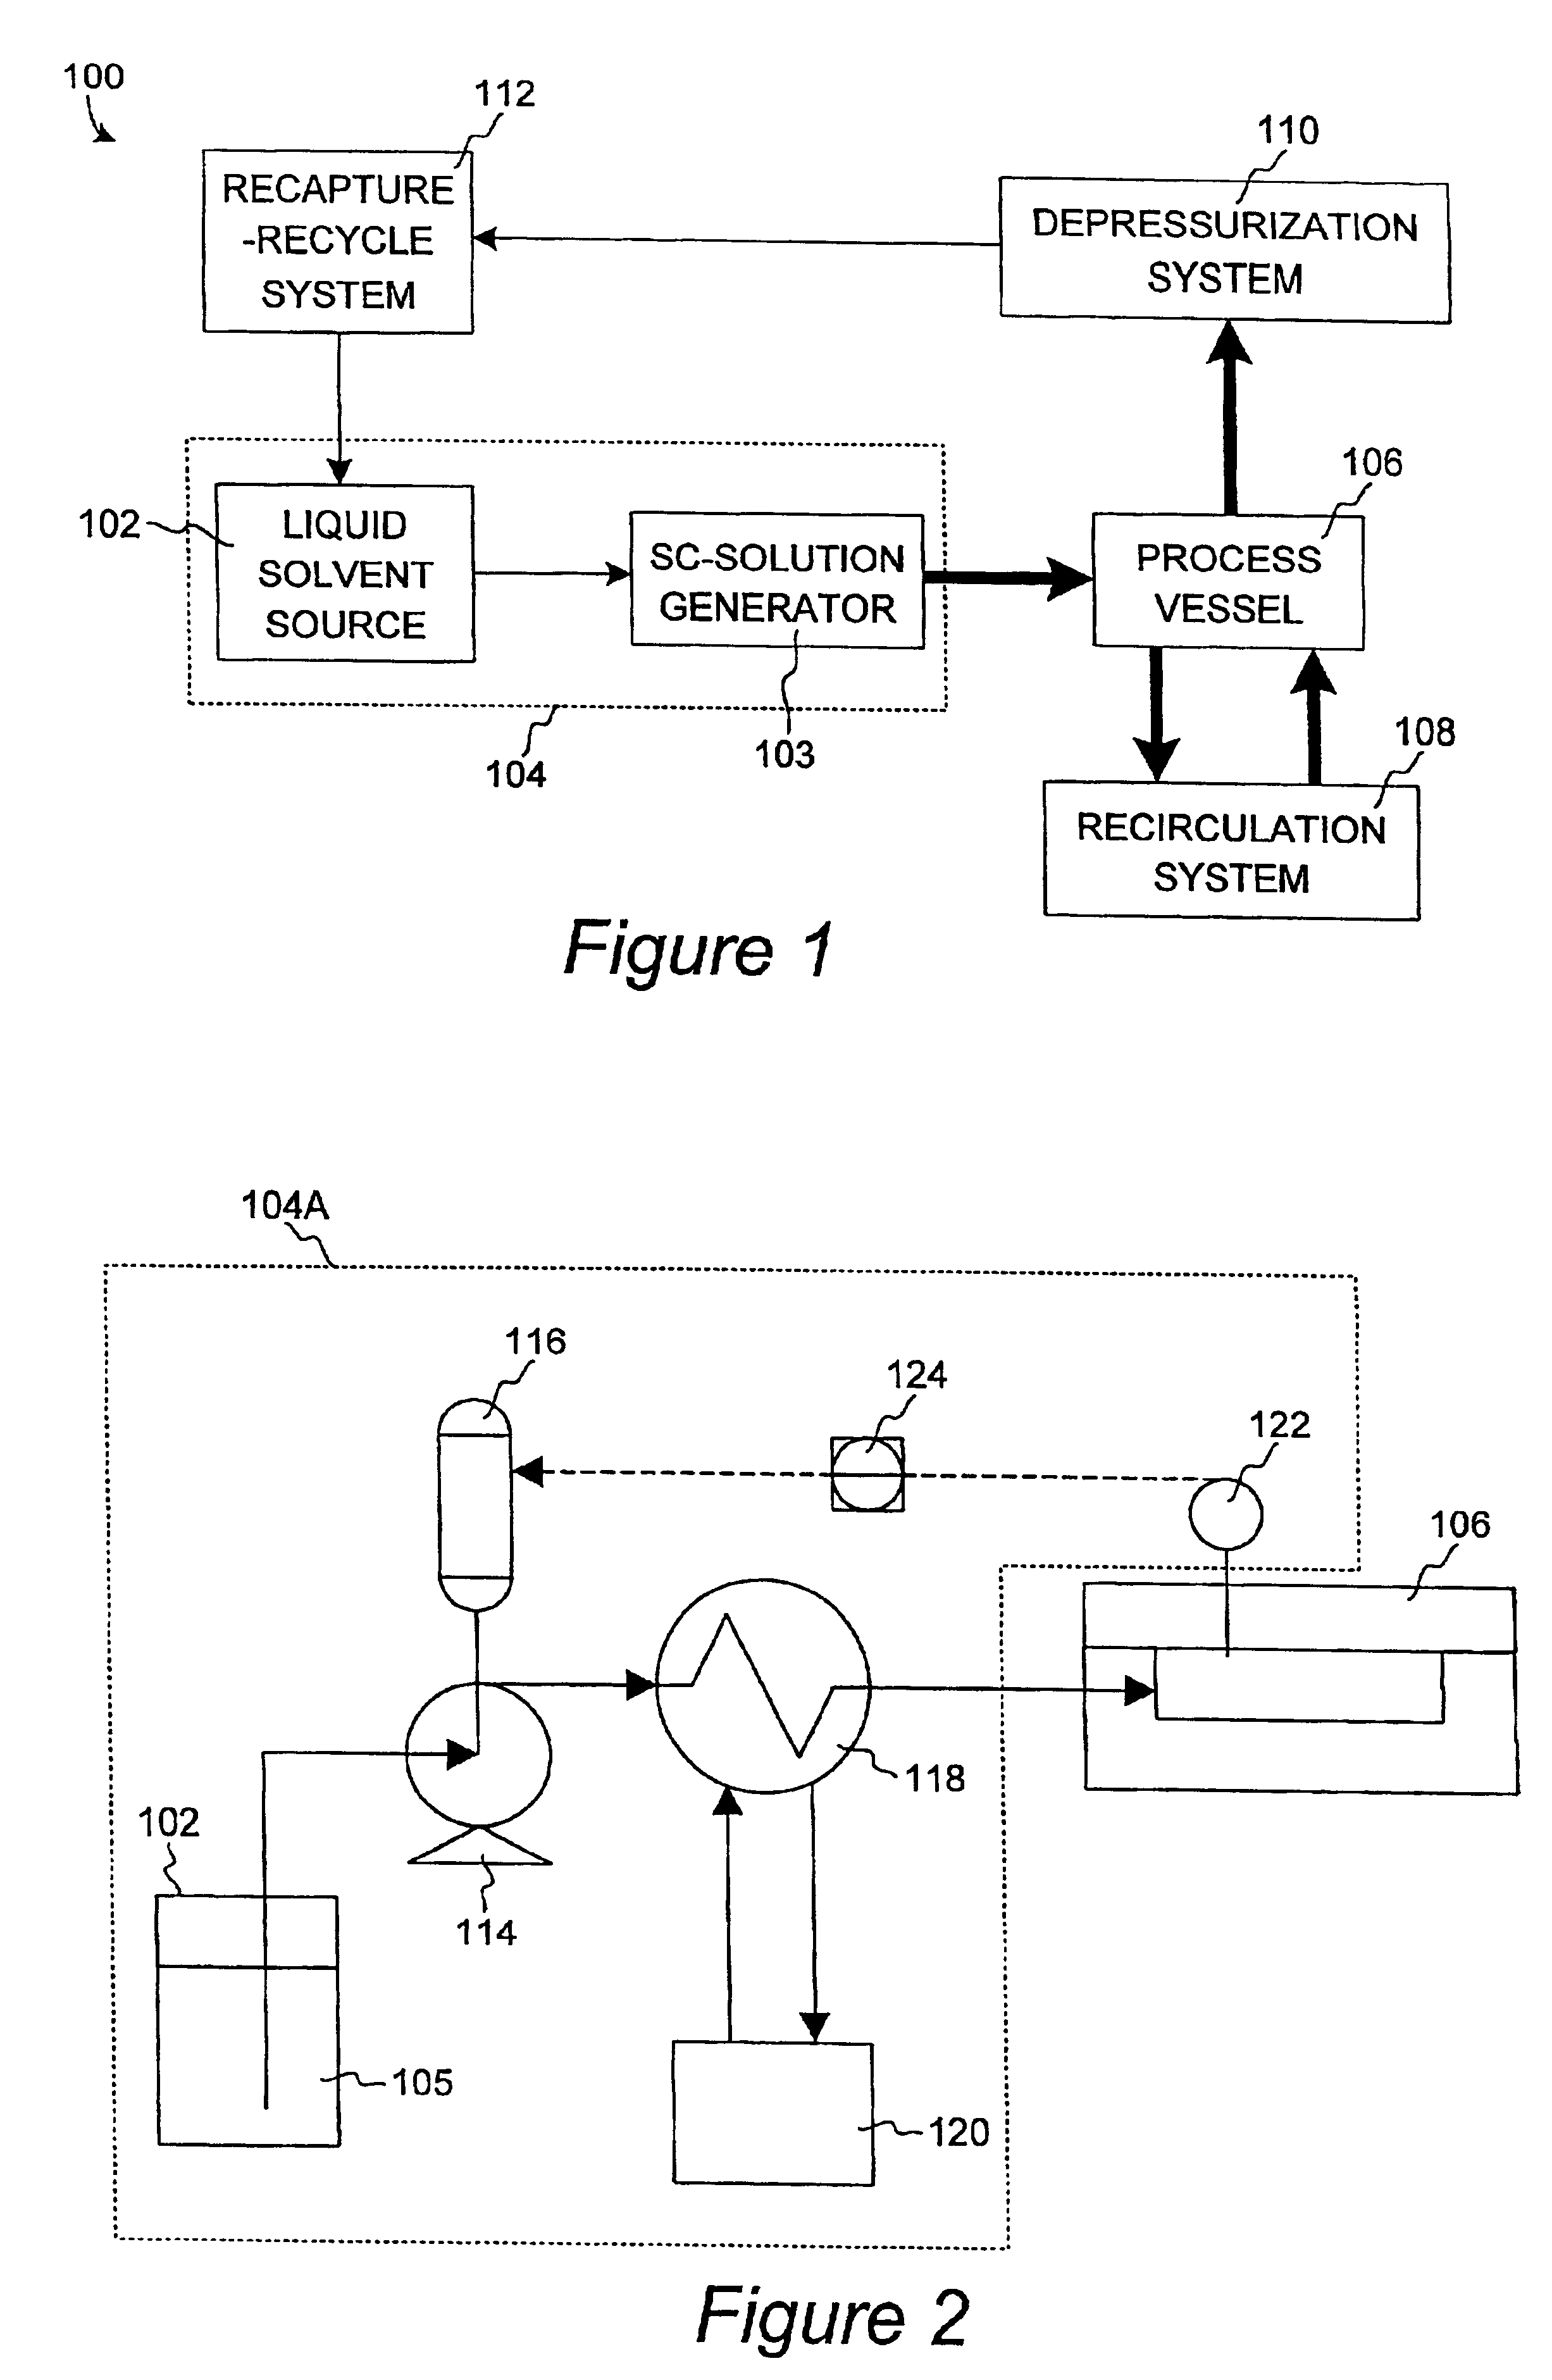 Apparatus and methods for processing semiconductor substrates using supercritical fluids